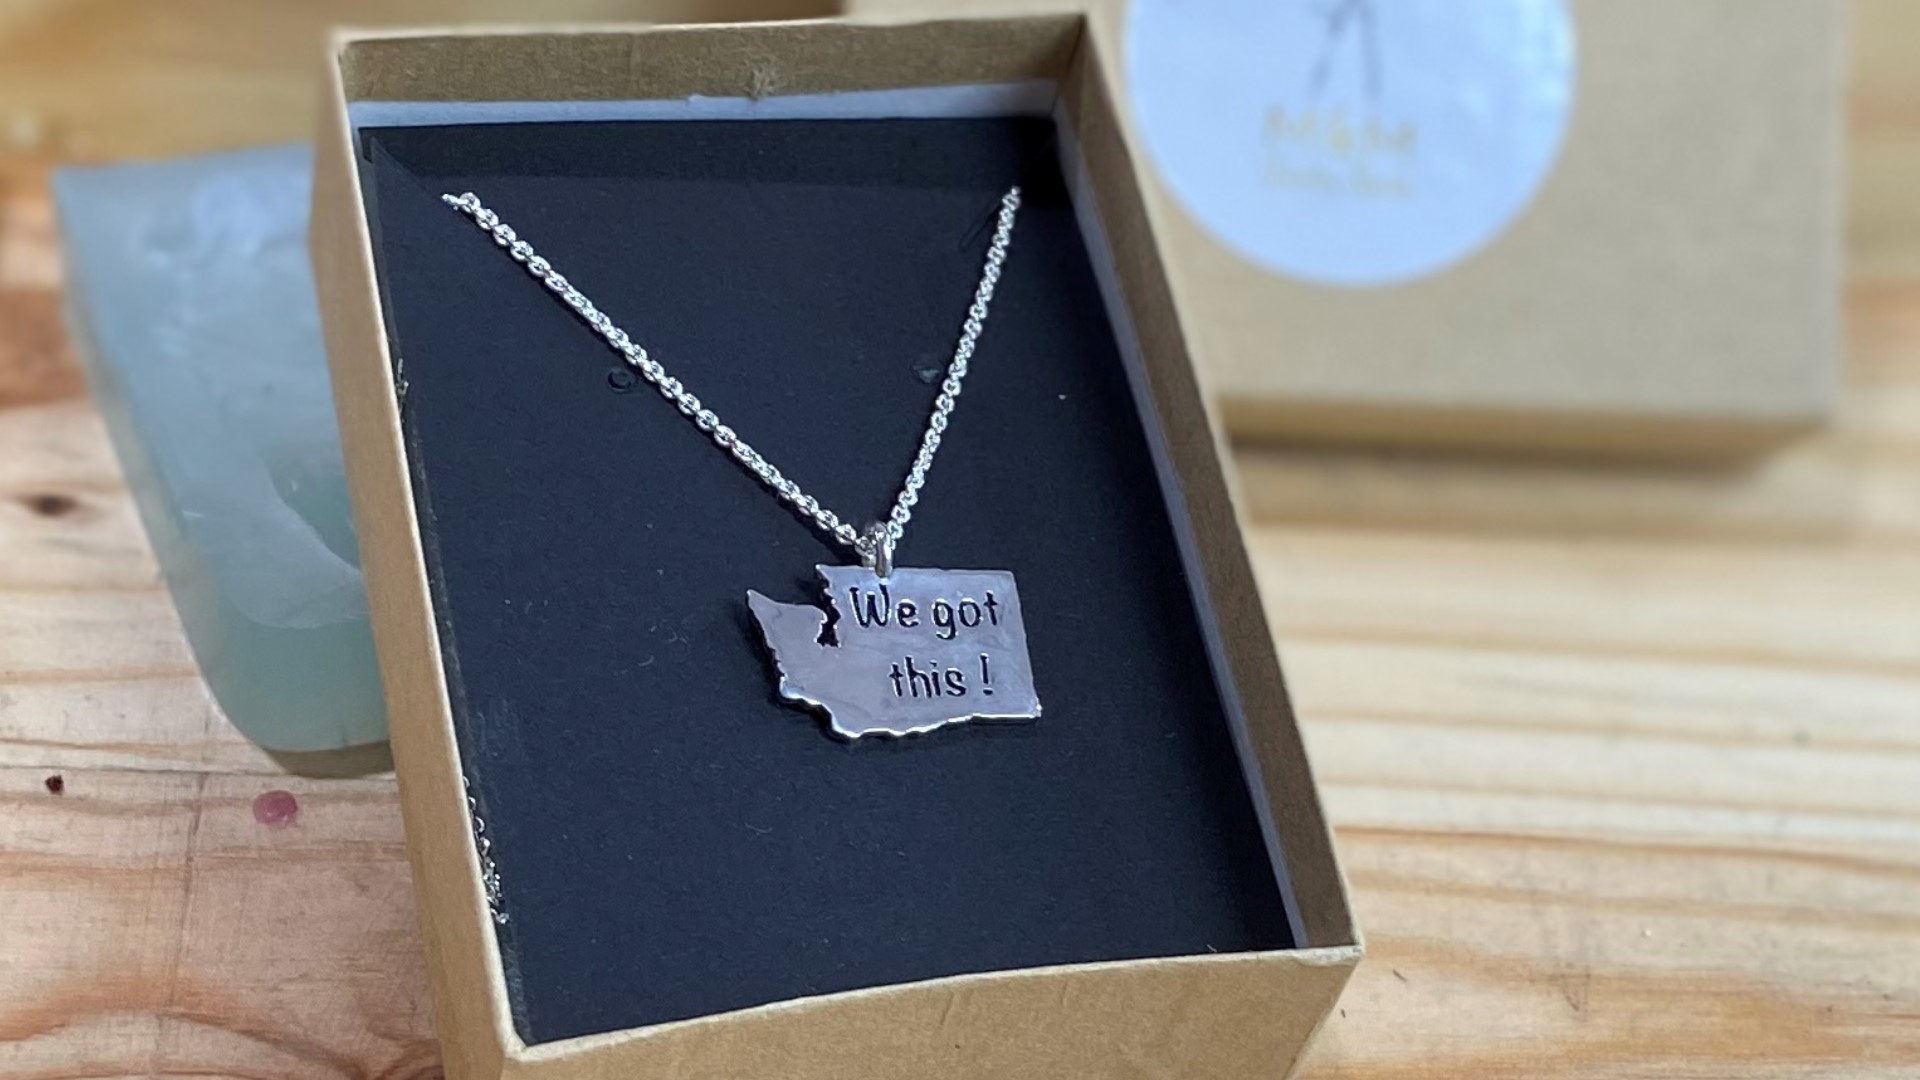 The sterling silver pendant is handmade in Seattle and 50% of each sale goes to the White Center Food Bank. #k5evening